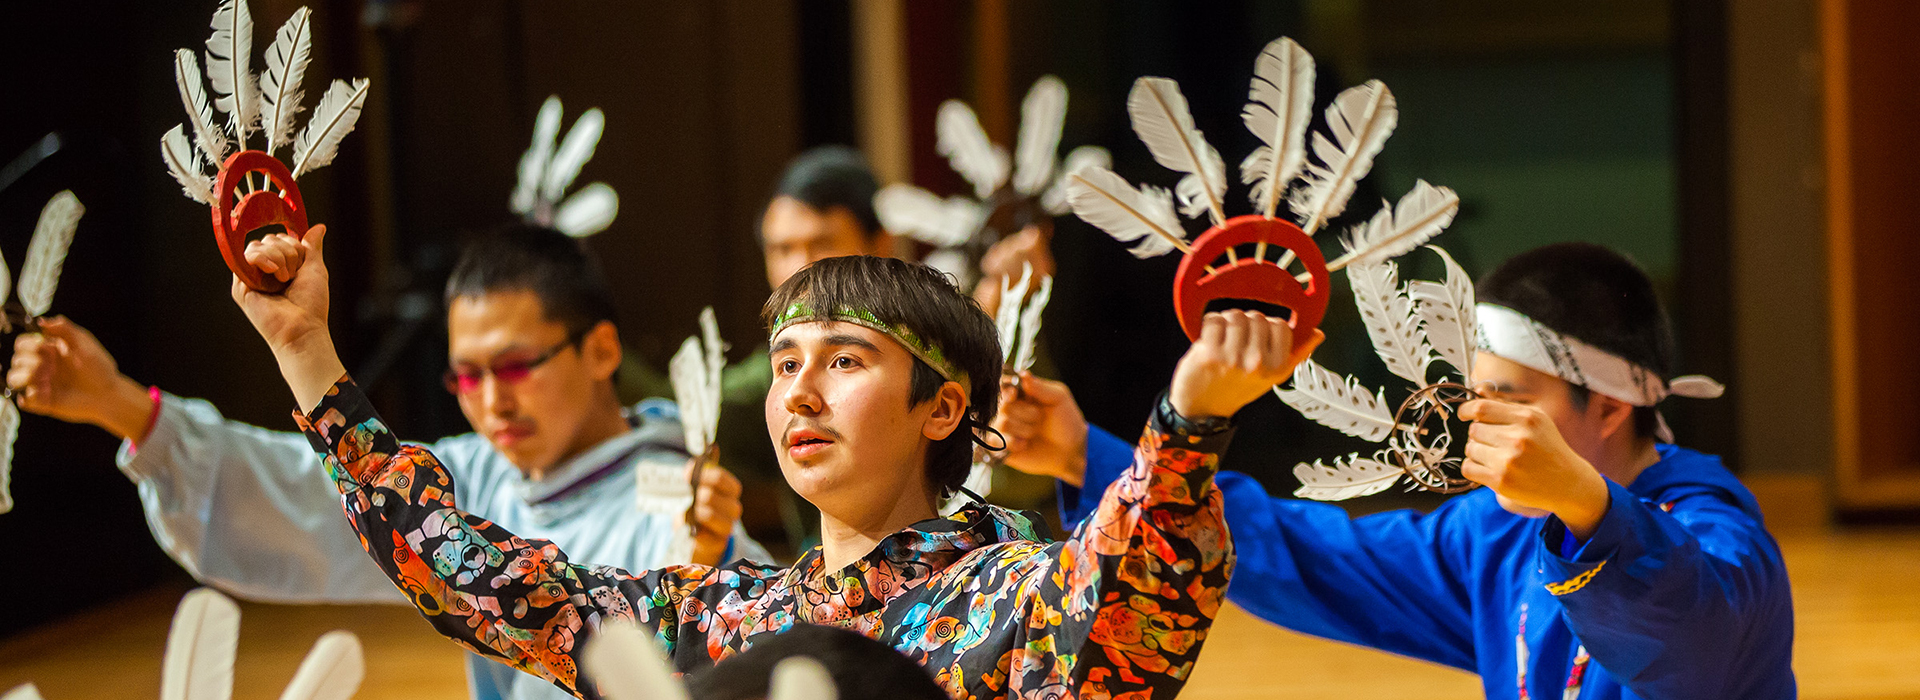 Mechanical Engineering Major, Baxter Bond, performs with the Inu-Yupiaq dance group during the 2013 Festival of Native Arts. Credit: UAF Photo by JR Ancheta